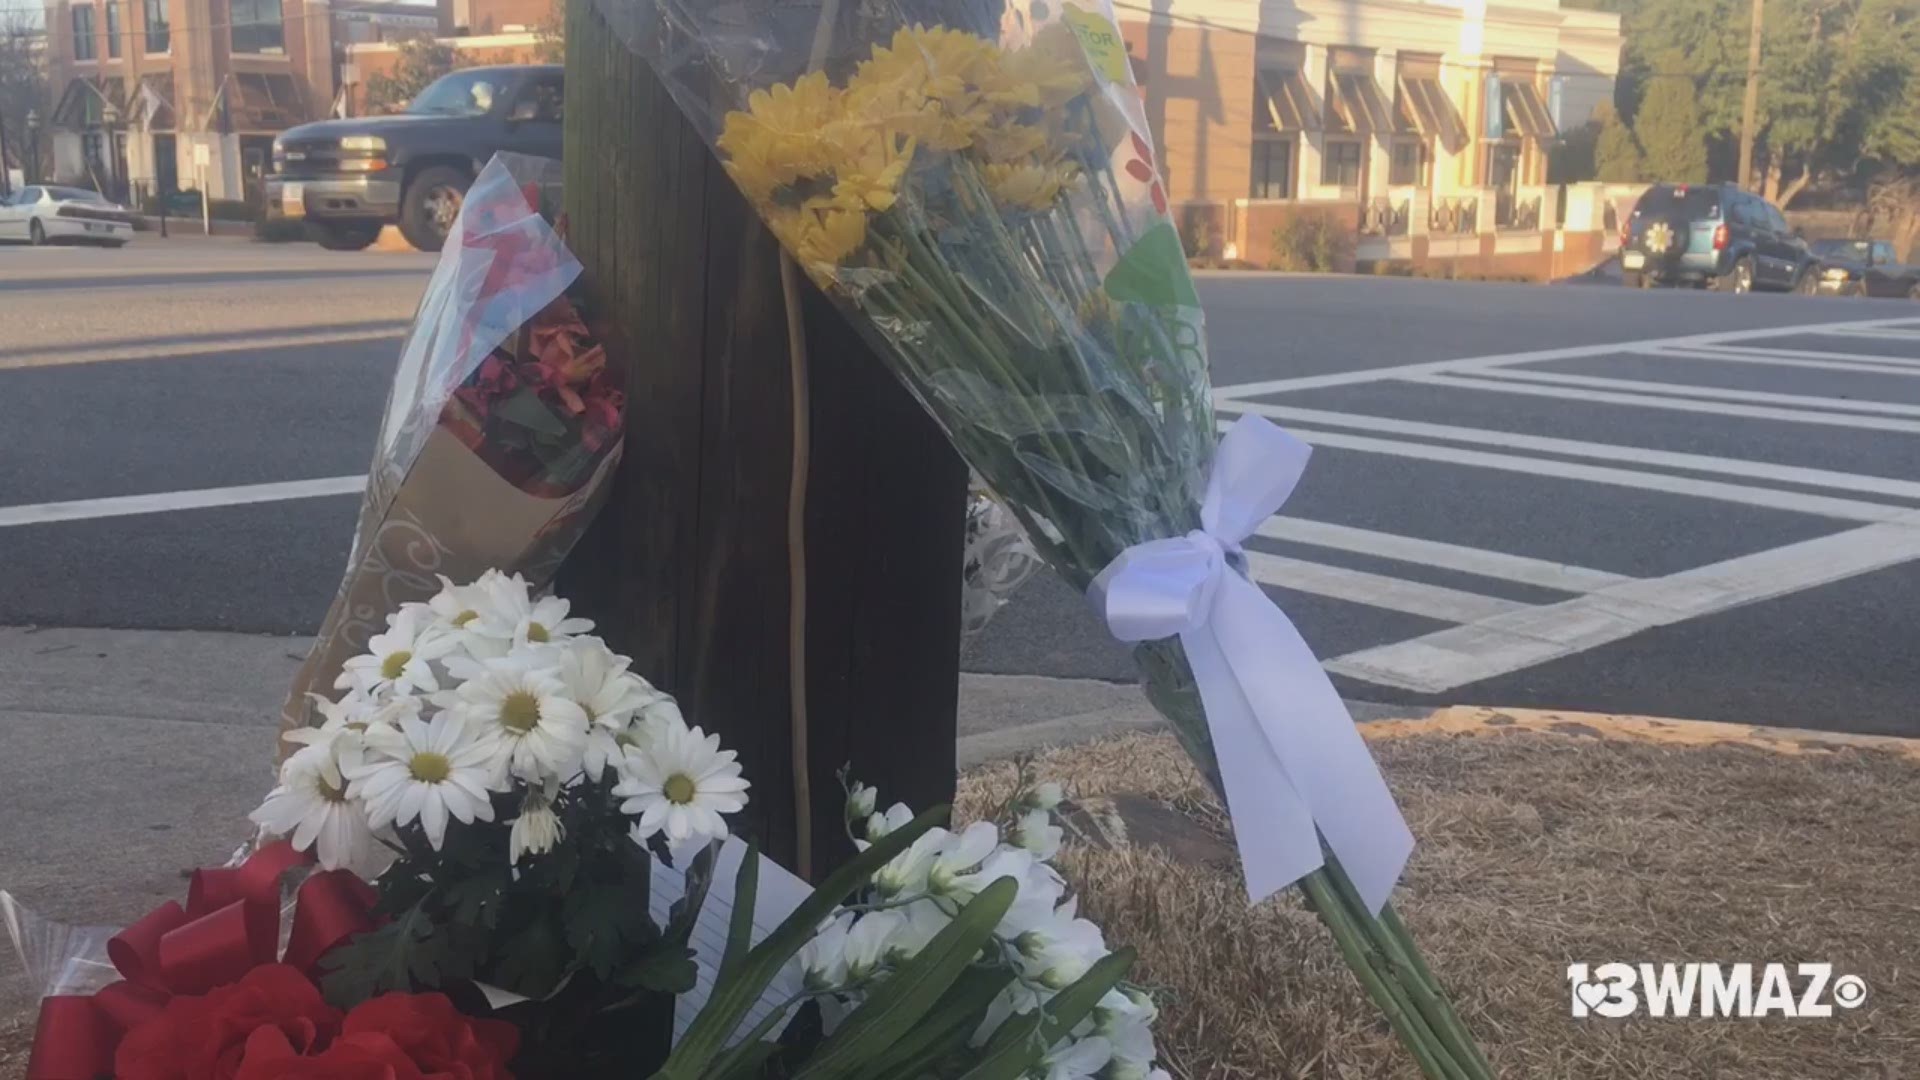 A 21-year-old GMC junior died Monday after being hit by a Georgia College bus in Milledgeville